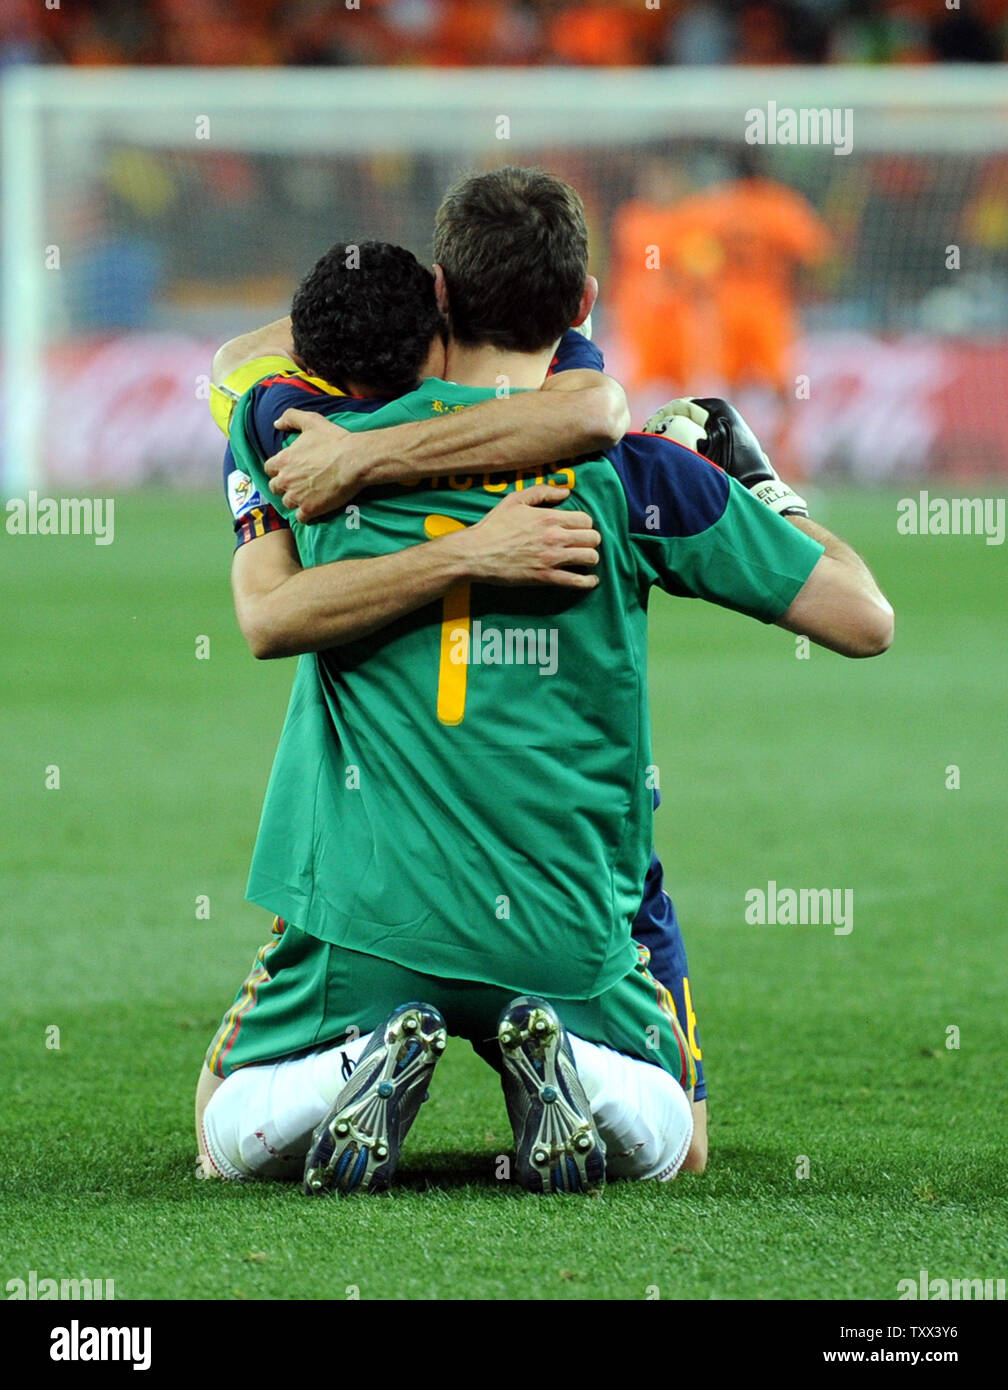 Iker Casillas of Spain celebrates with team-mate Sergio Busquets during the FIFA World Cup Final match at Soccer City Stadium in Johannesburg, South Africa on July 11, 2010. UPI/Chris Brunskill Stock Photo